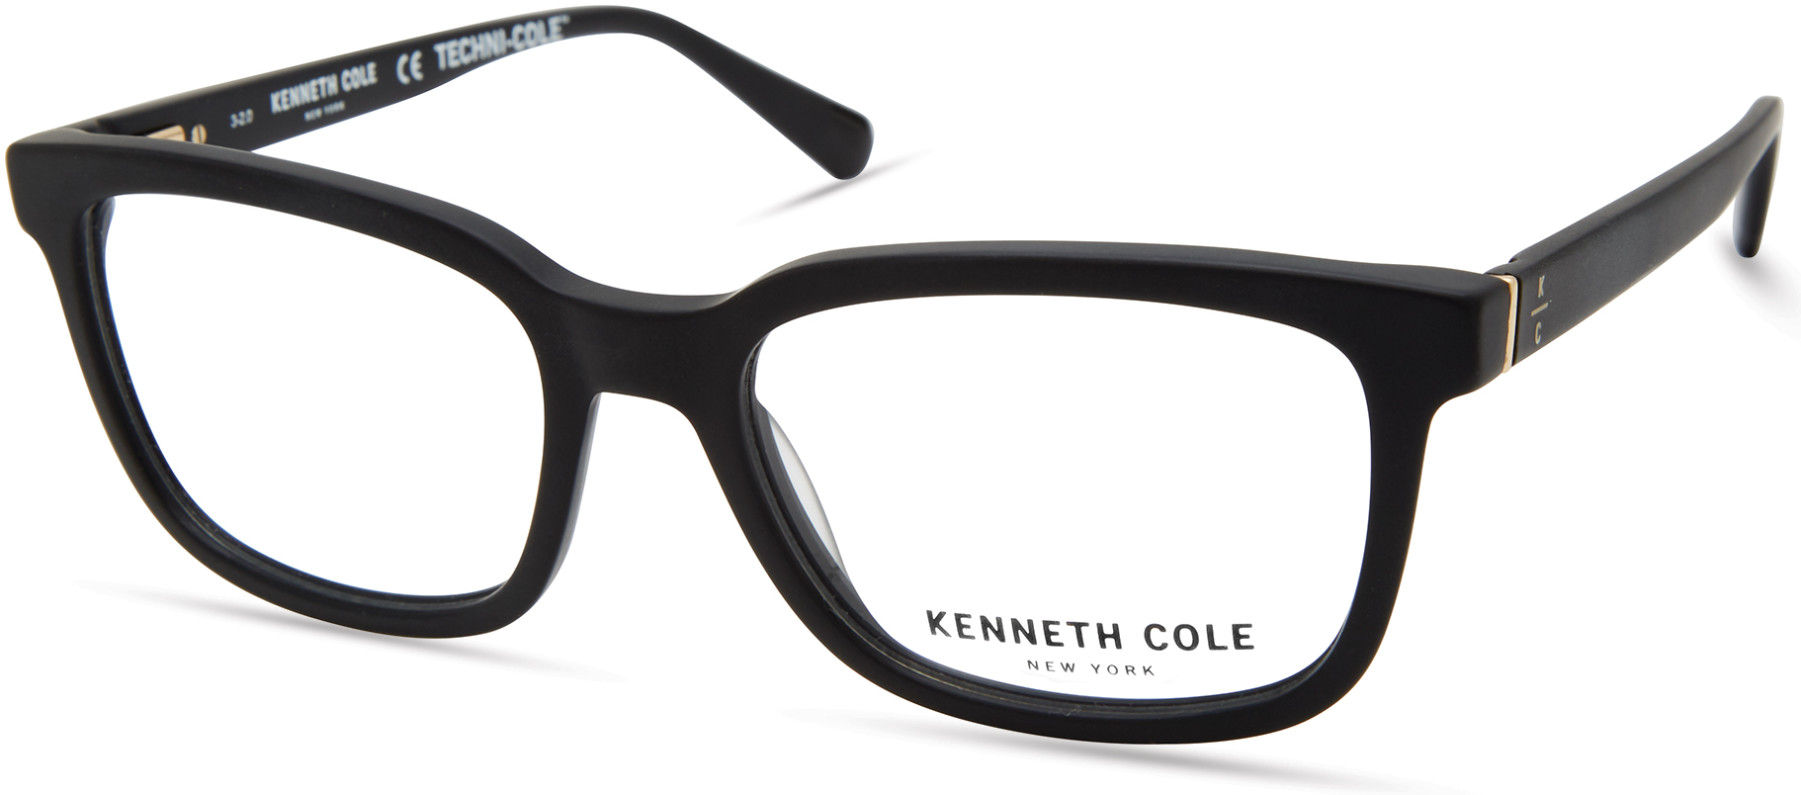 KENNETH COLE NY 0320